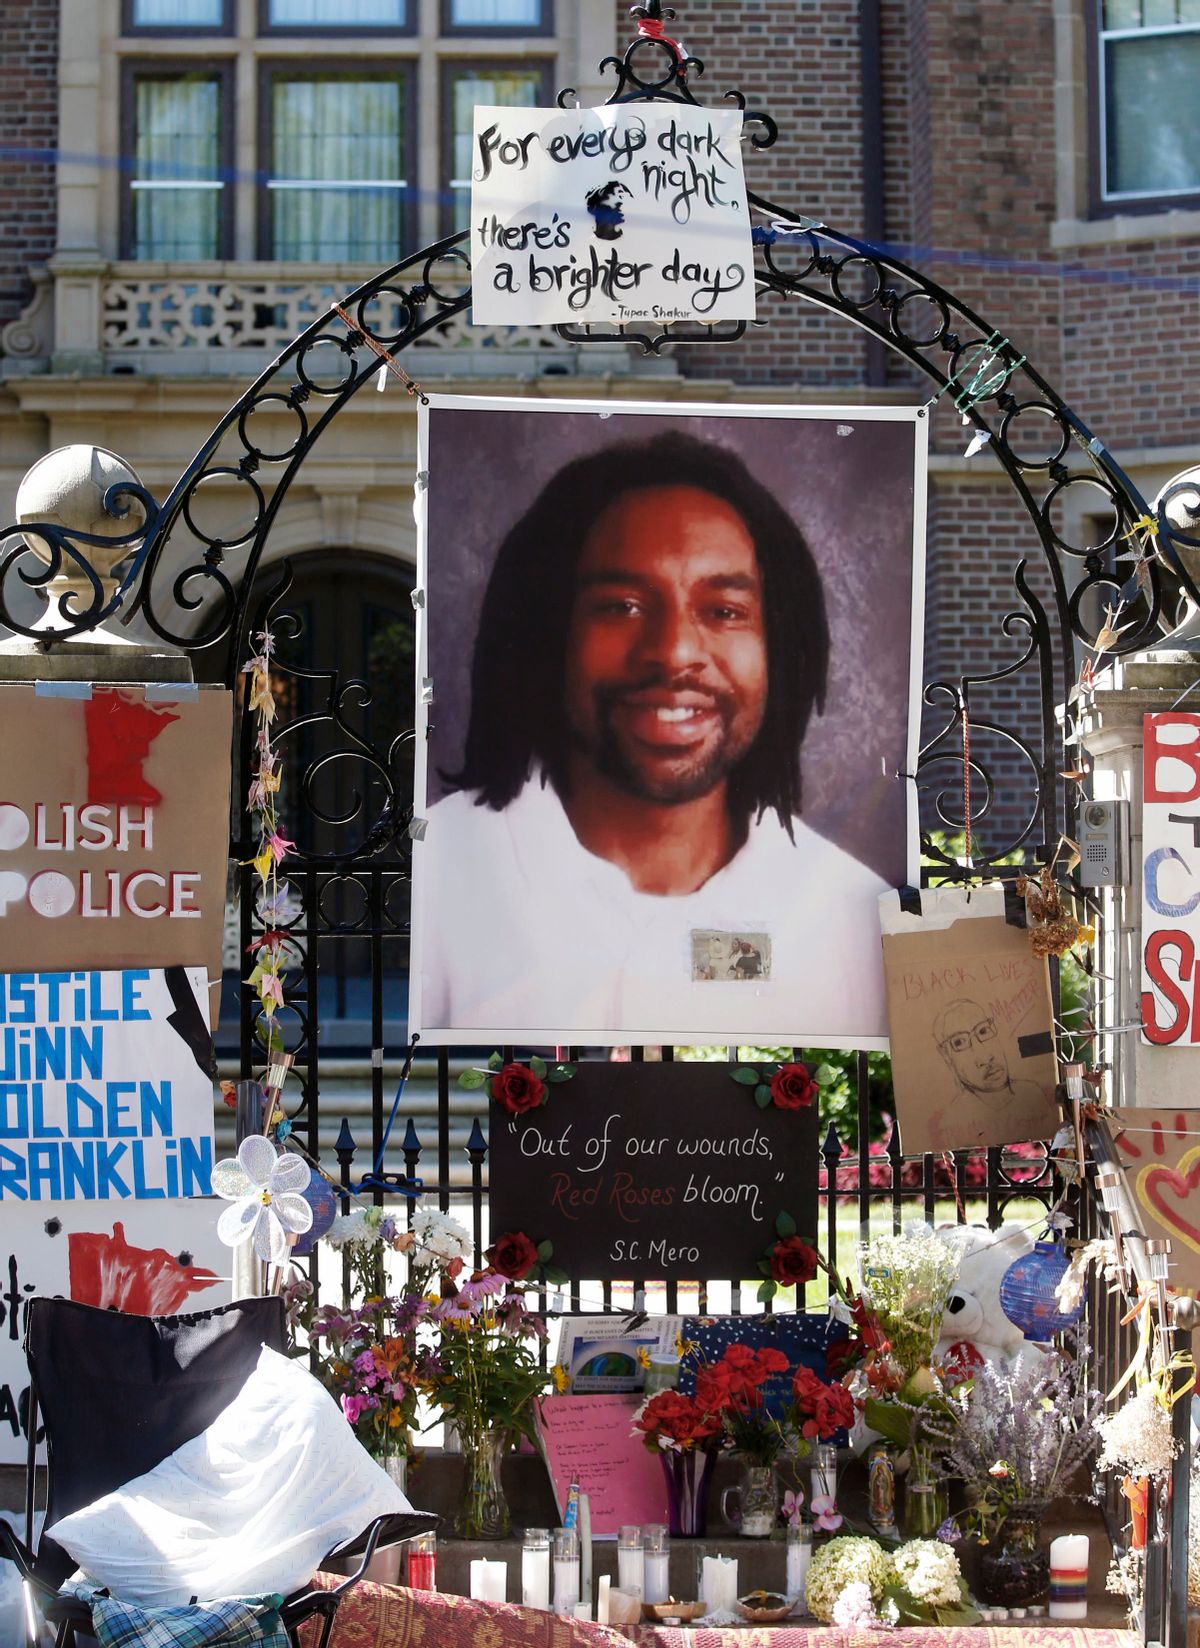 FILE - In this July 25, 2016, file photo, a memorial including a photo of Philando Castile is attached to the gate to the governor's residence where protesters demonstrated in St. Paul, Minn. Attorneys for Jeronimo Yanez, the Minnesota police officer accused of fatally shooting Castile say Castile's gun was accessible and that he was reaching for it when he was killed. A memo filed Tuesday, Feb. 7, 2017, in Ramsey County District Court contradicts prosecutors' claims that St. Anthony Officer Yanez didn't see the weapon and made conflicting statements about it. (AP Photo/Jim Mone, File) (AP)